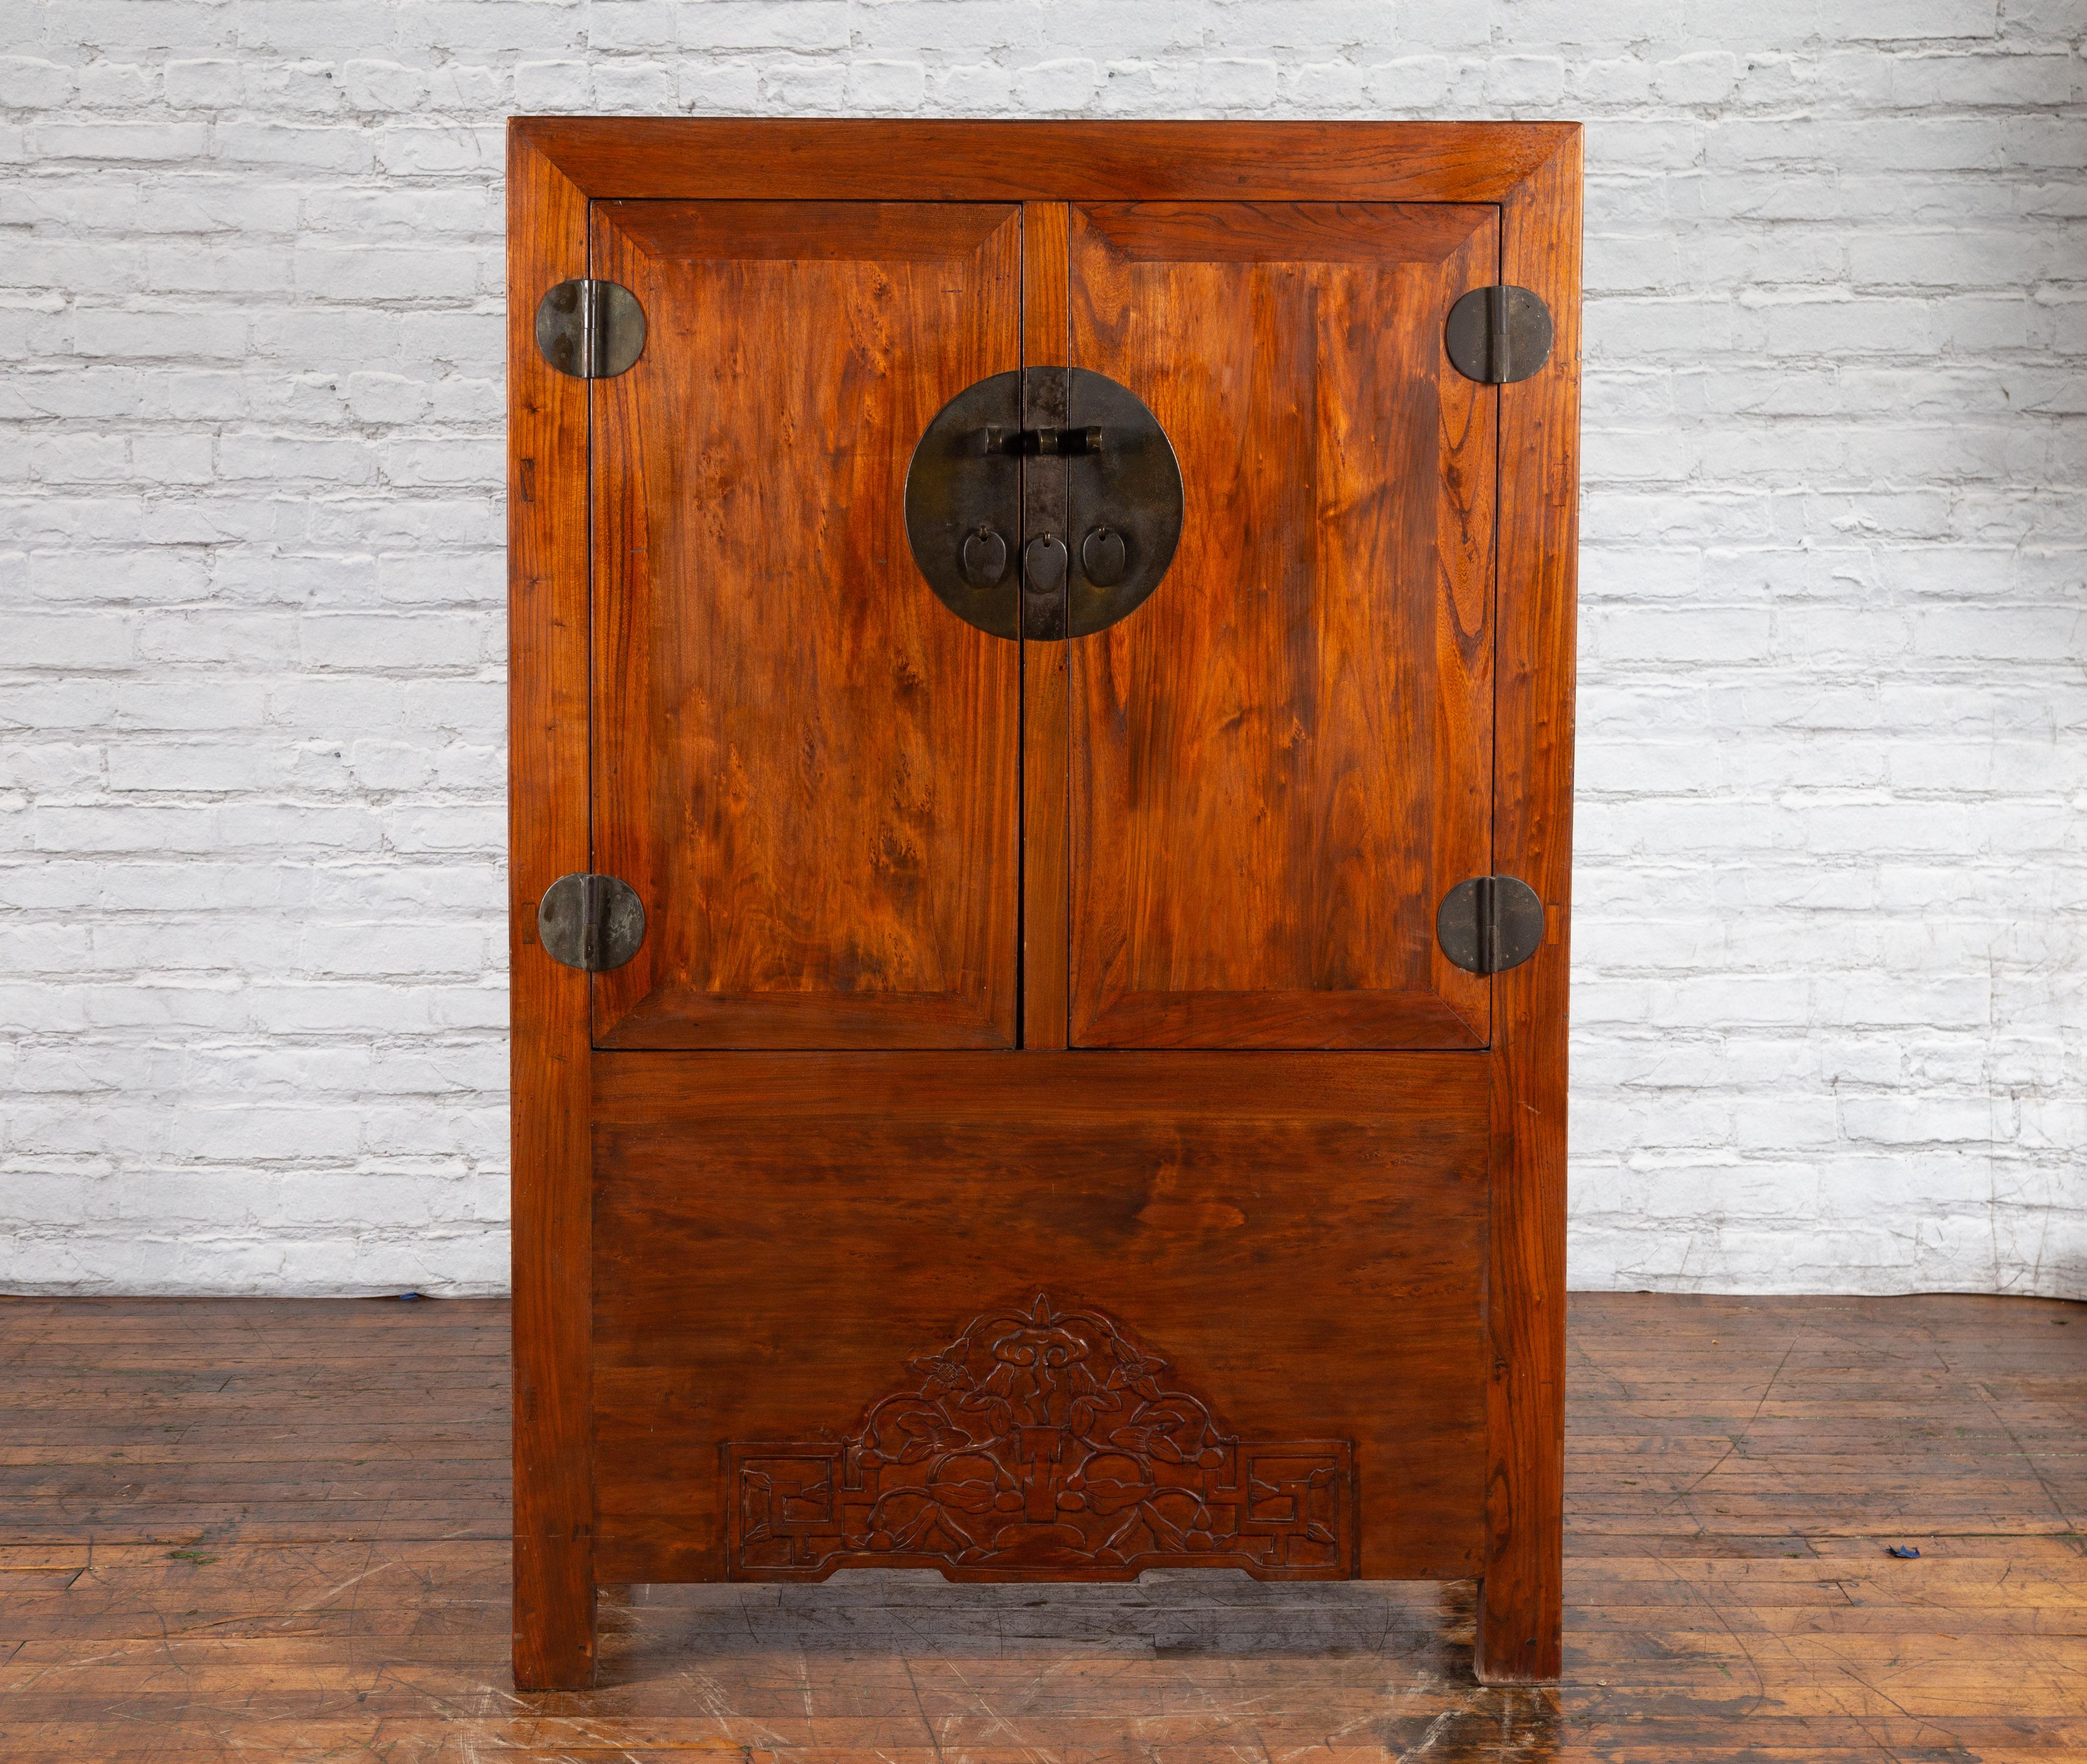 A Chinese Qing Dynasty period armoire from the 19th century with natural wood finish, carved skirt, hidden drawers and medallion hardware. Created in China during the Qing Dynasty period in the 19th century, this wooden armoire features a linear